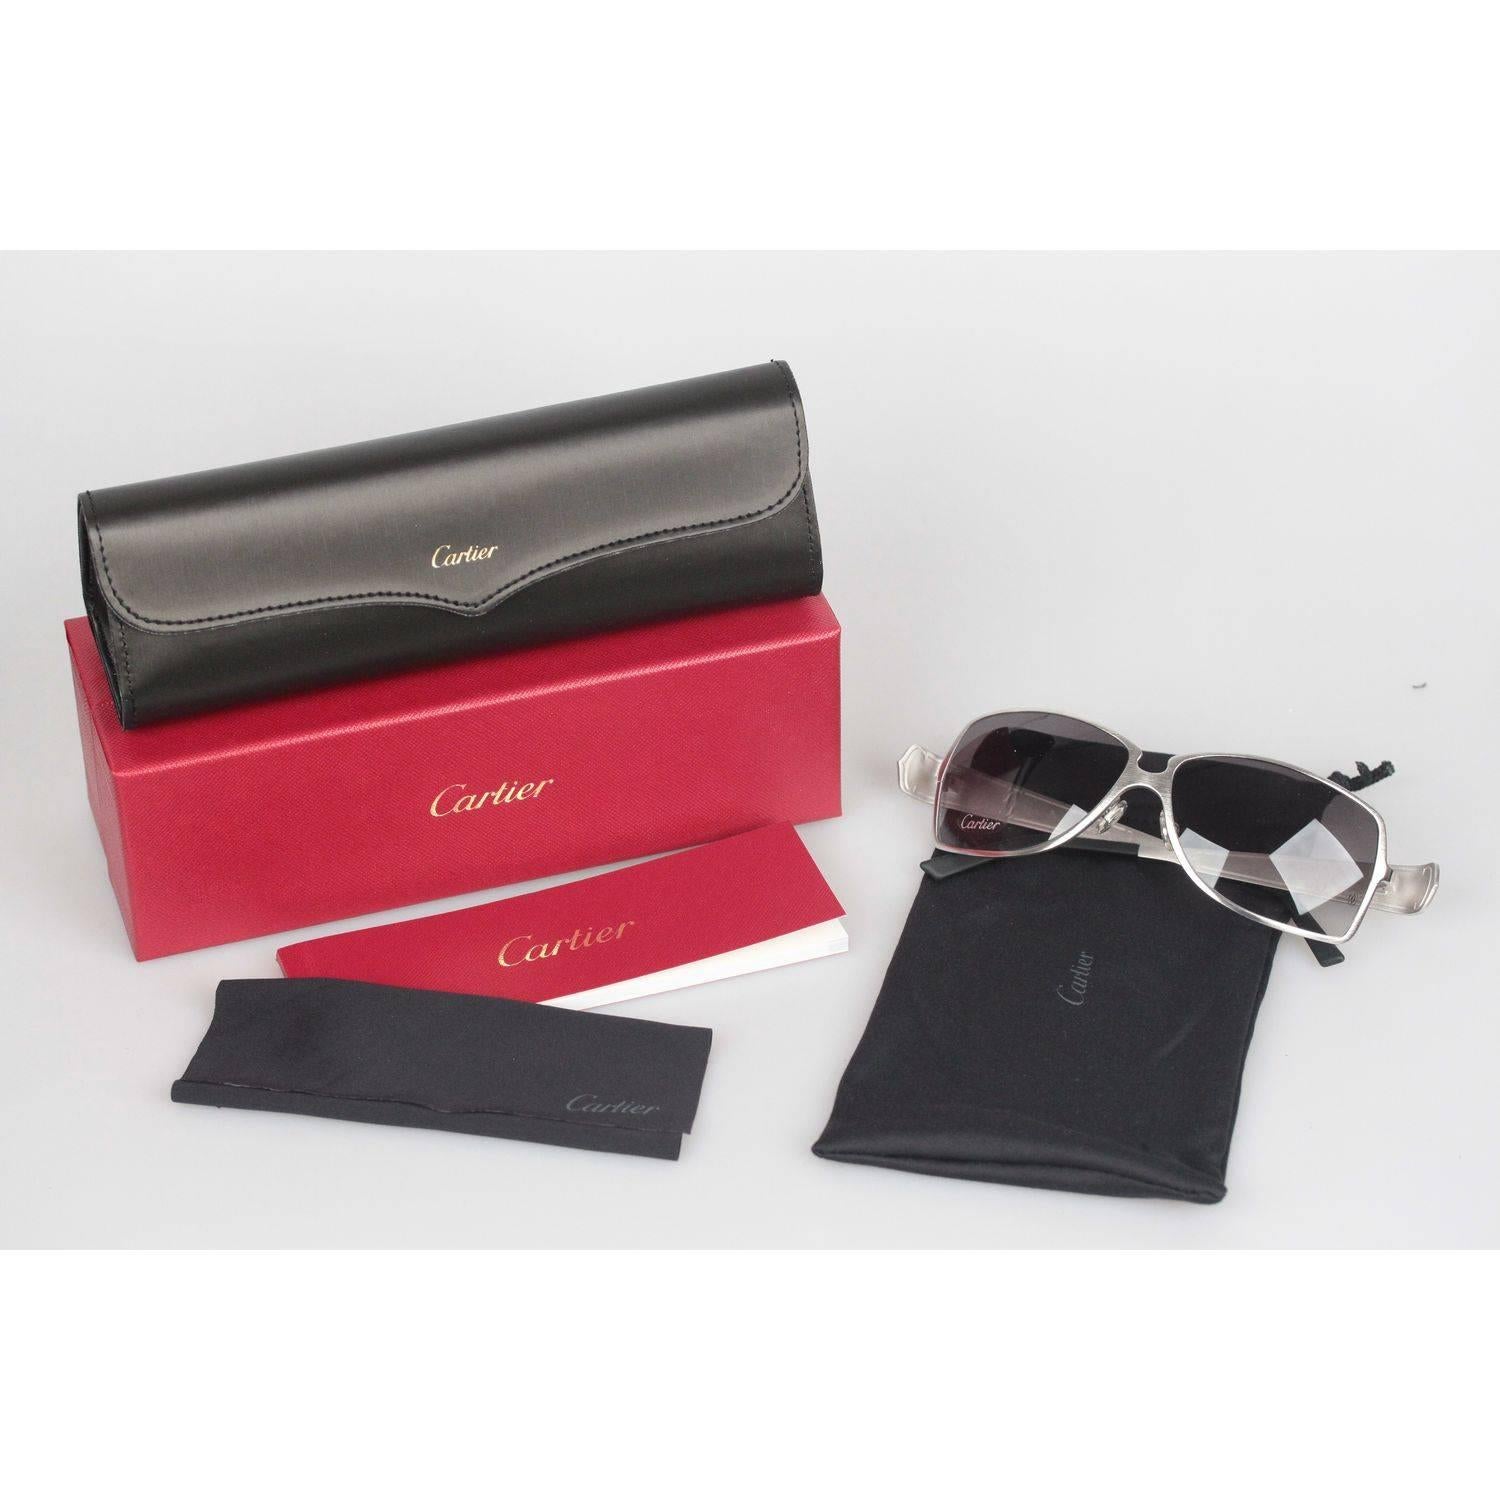 Cartier Sunglasses, Limited Edition - Edition C de Cartier
Made in France
Black genuine leather side inserts, platinum frame
Original Cartier BLUE gradient Lens and CARTIER sticker

Measurements:
- TEMPLE MAX. LENGTH: 135 mm
- TEMPLE TO TEMPLE - MAX